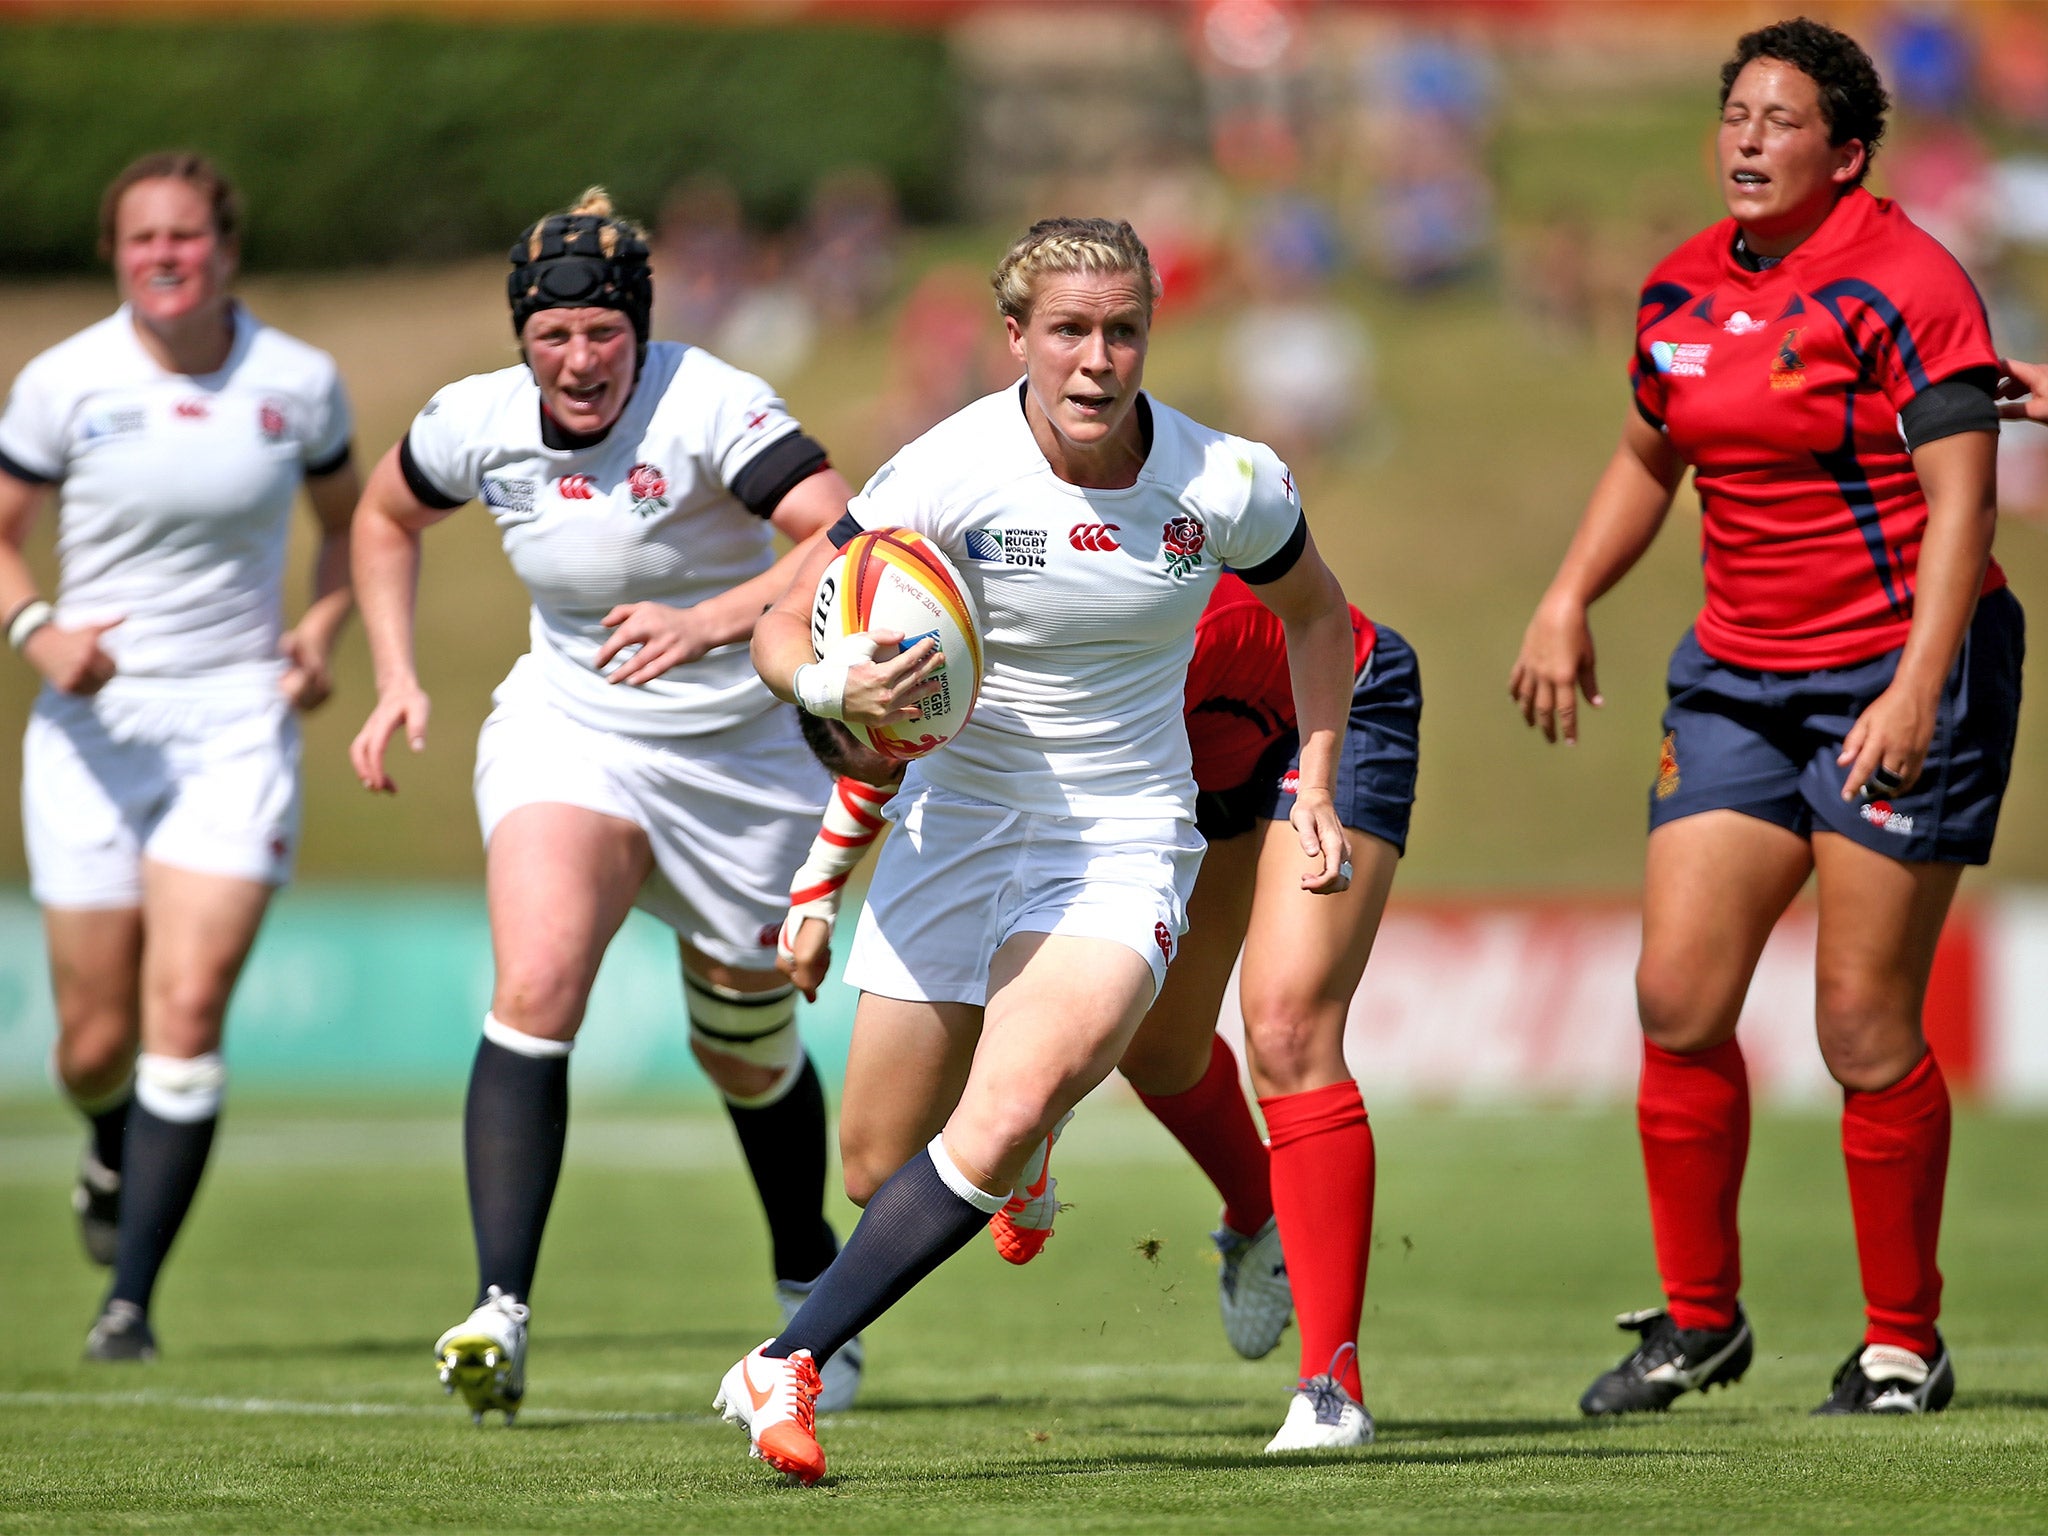 England’s Danielle Waterman breaks clear to score a try in yesterday’s 45-5 win over Spain